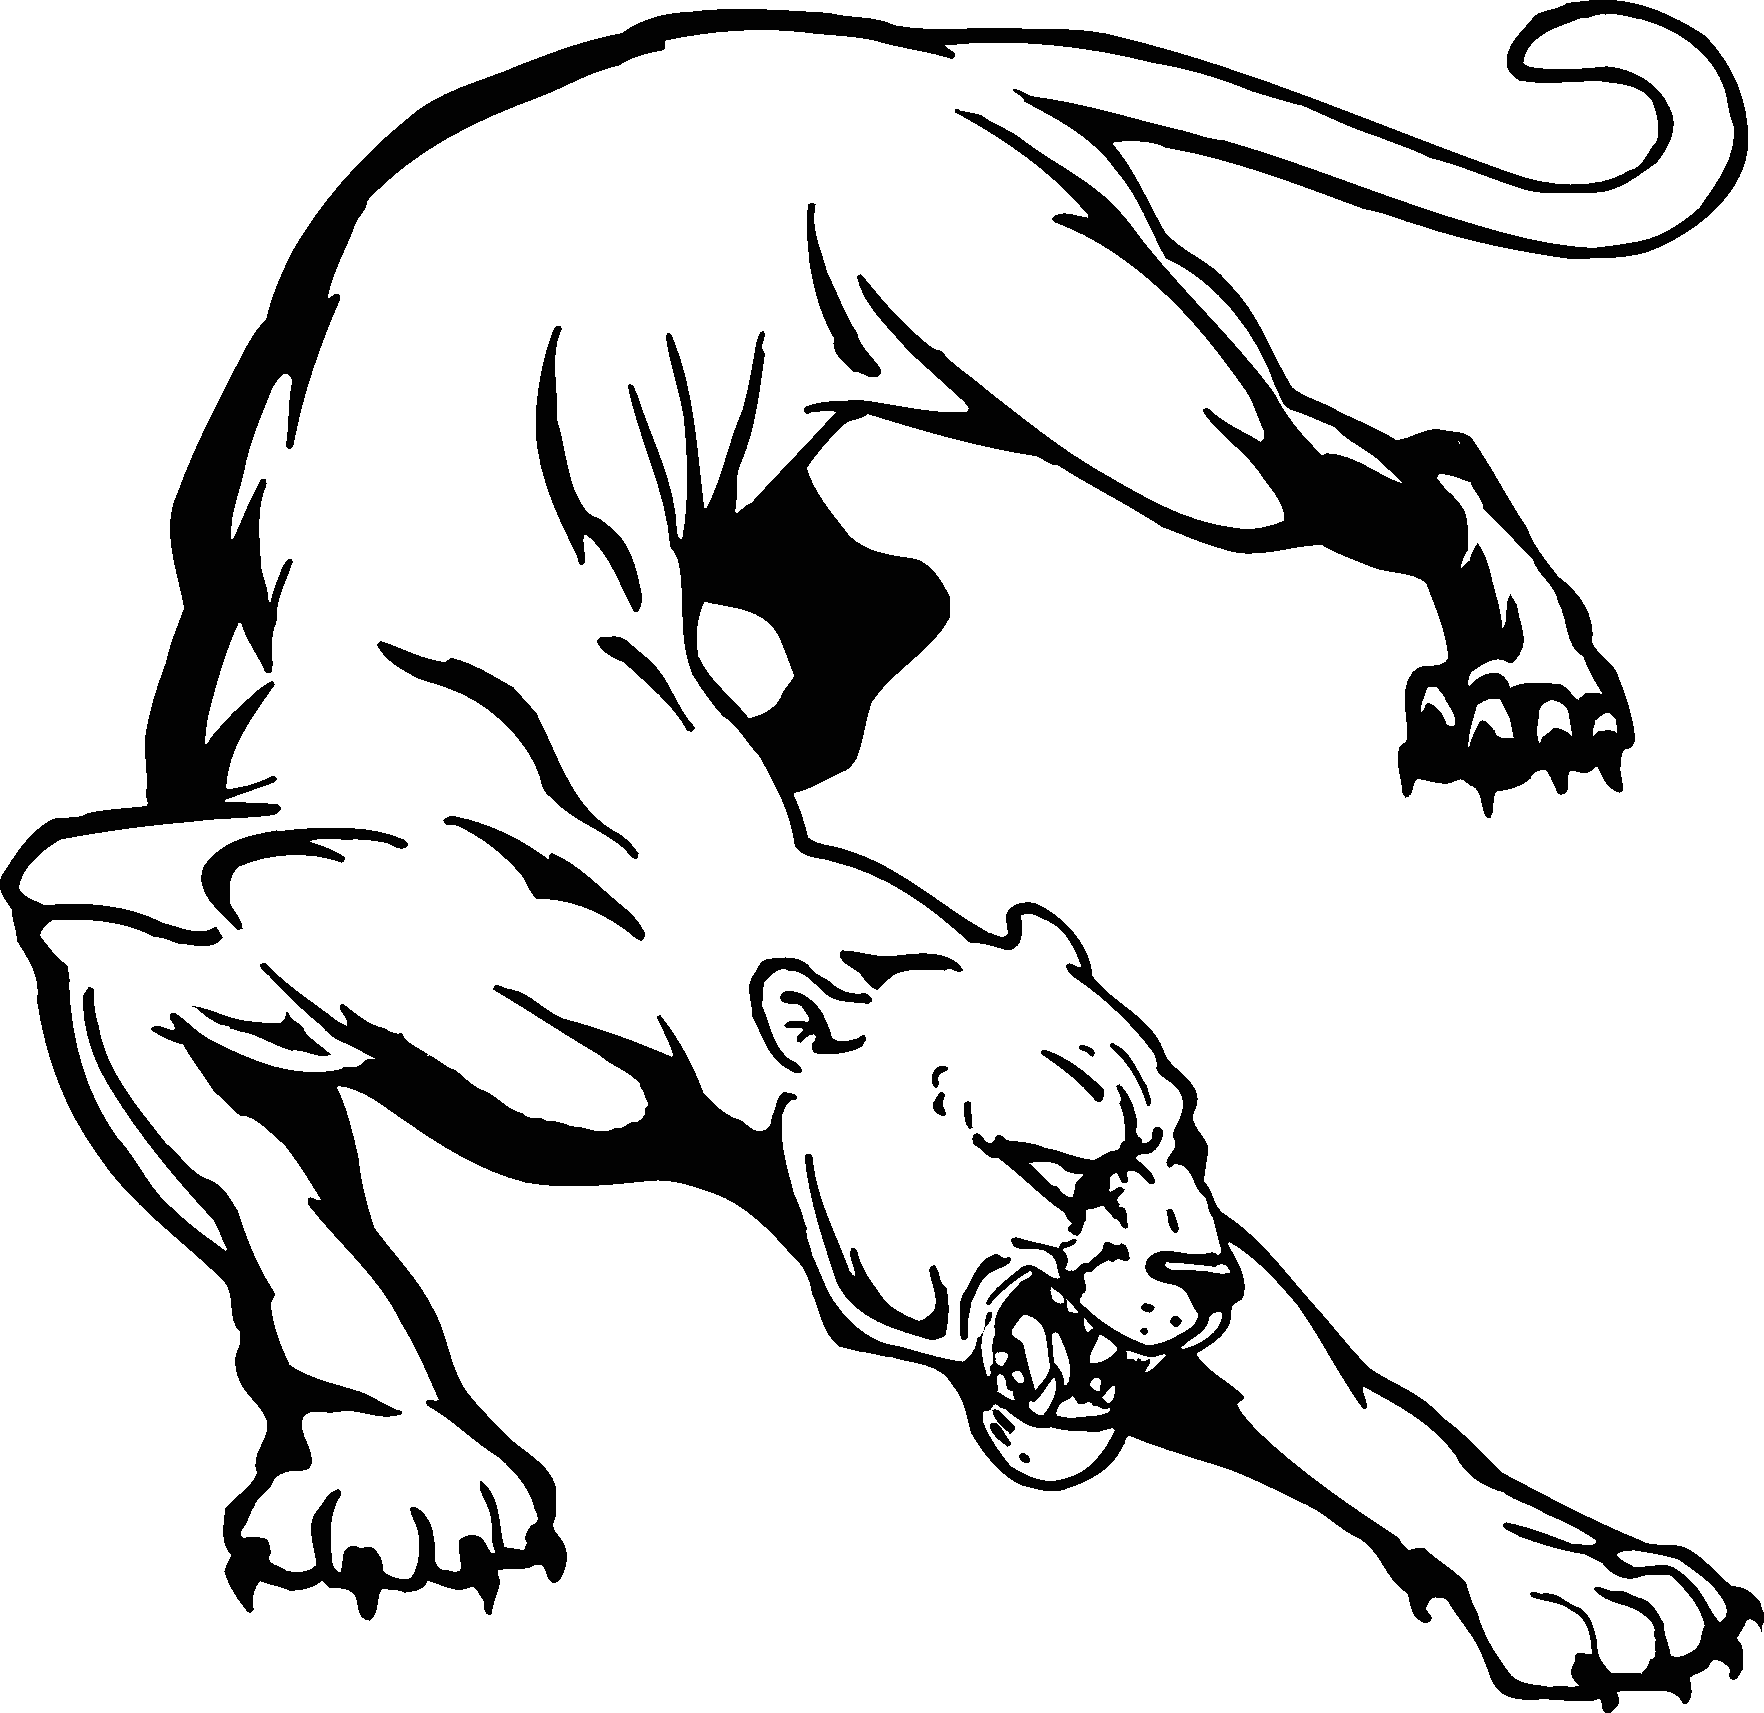 Panther clipart #17, Download drawings